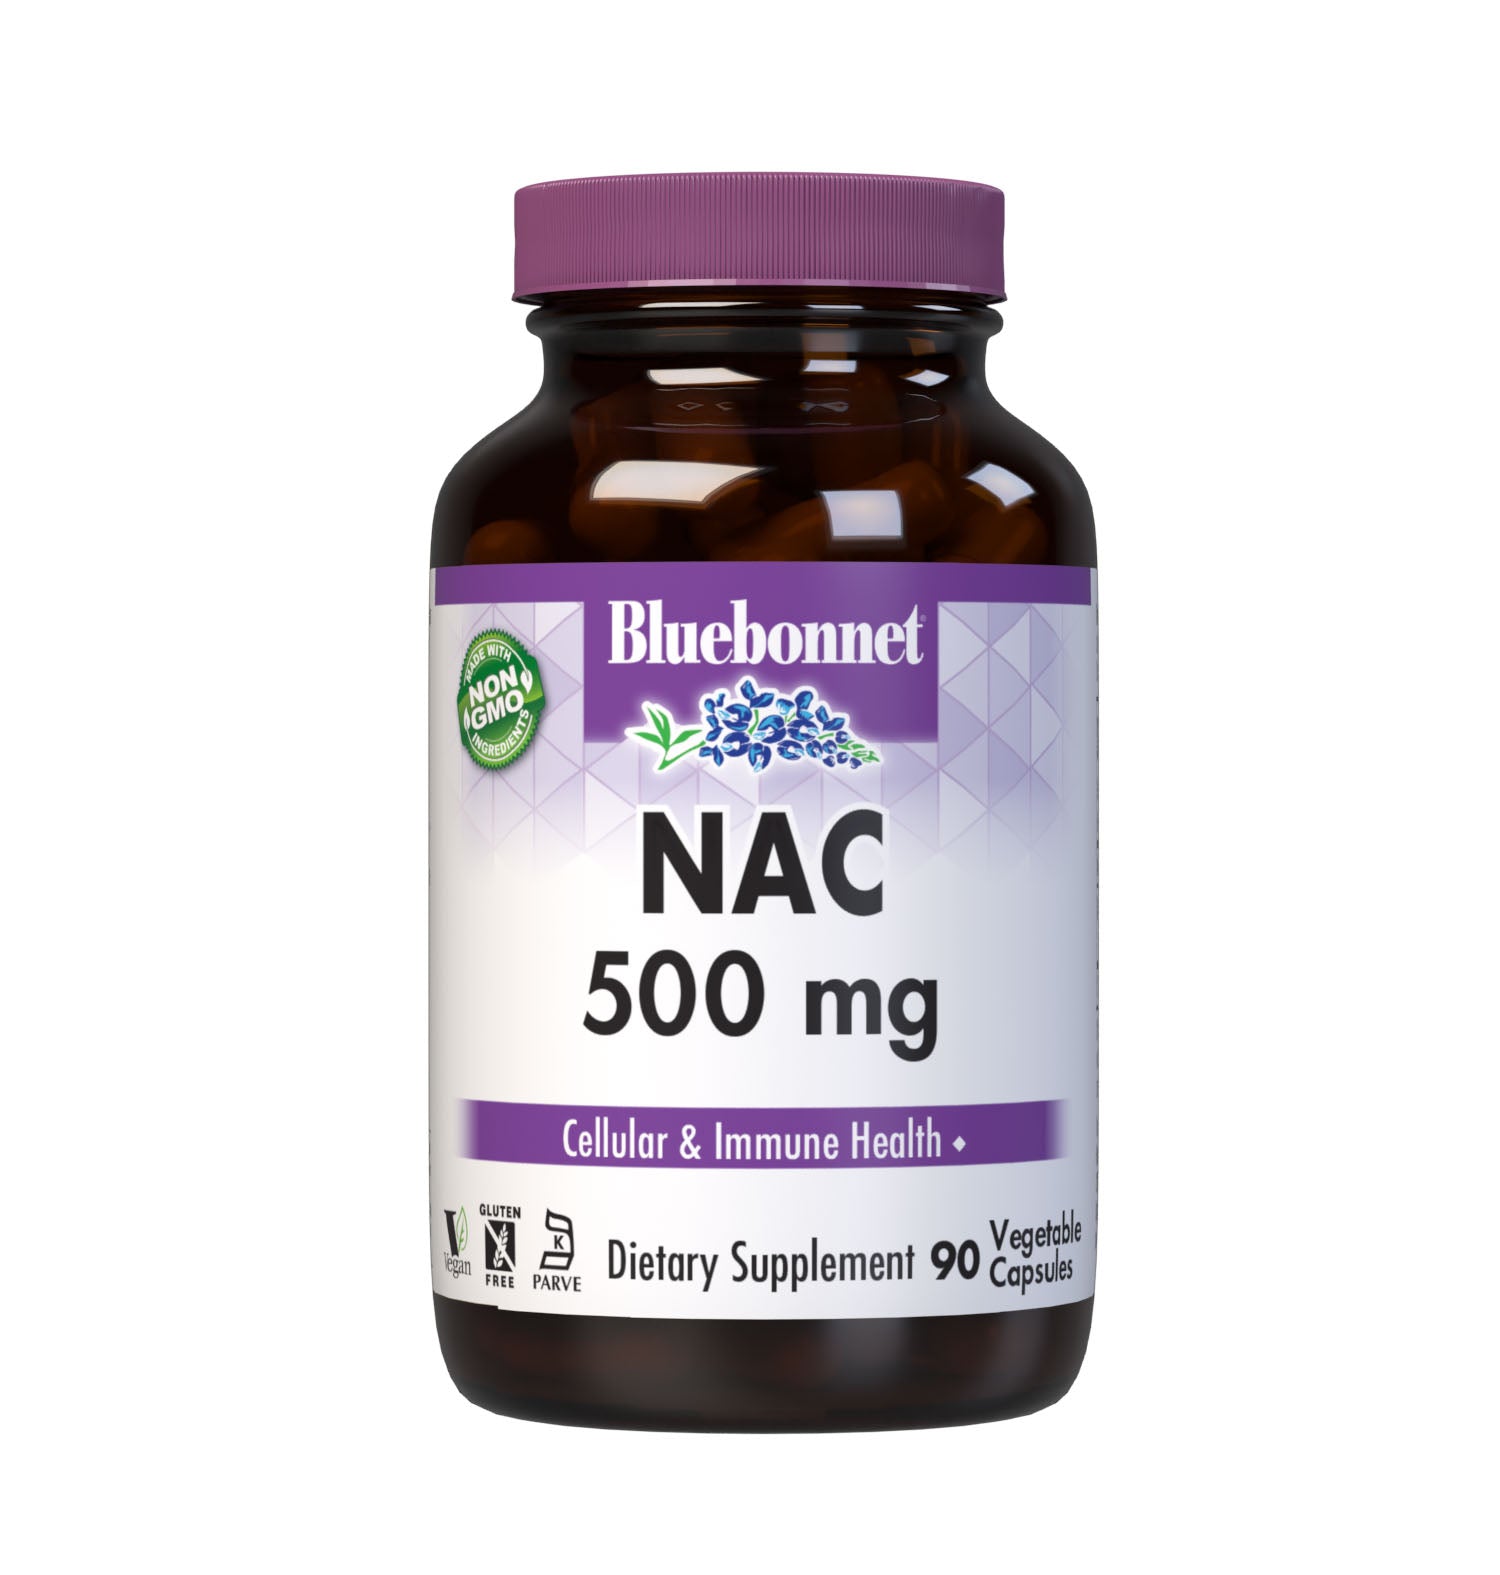 Bluebonnet’s NAC 500 mg 90 vegetable capsules are formulated with the free-form amino acid N-acetyl-cysteine in its crystalline form to help support cellular health and immune function. #size_90 count